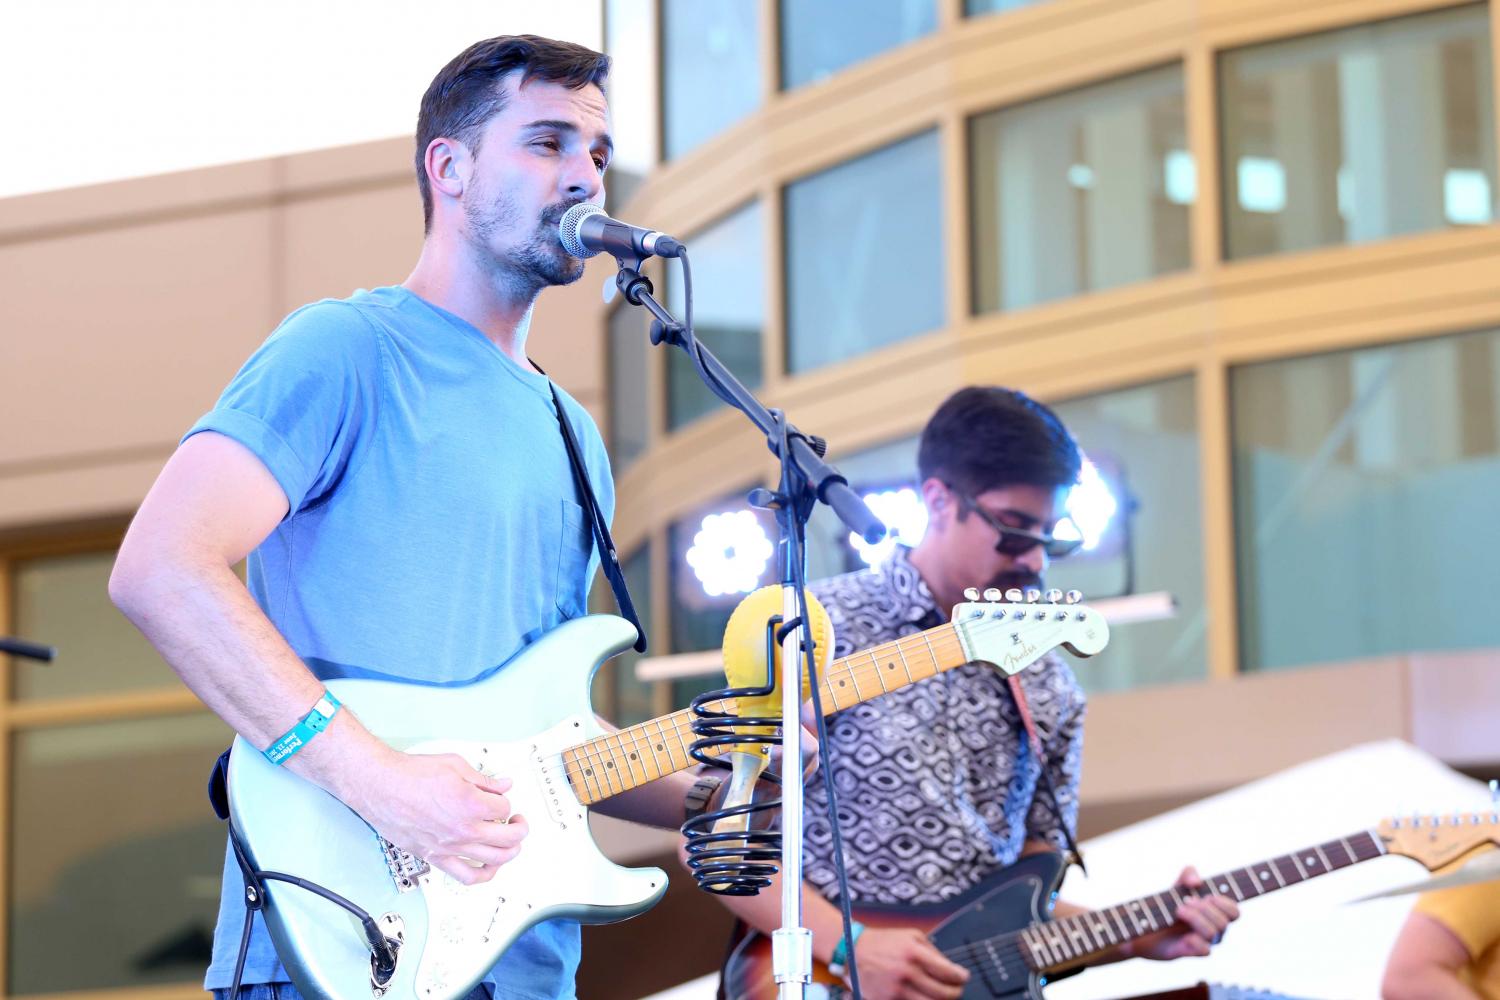 Great Shapes perform at El Paso Street Fest day one on Friday, June 23.